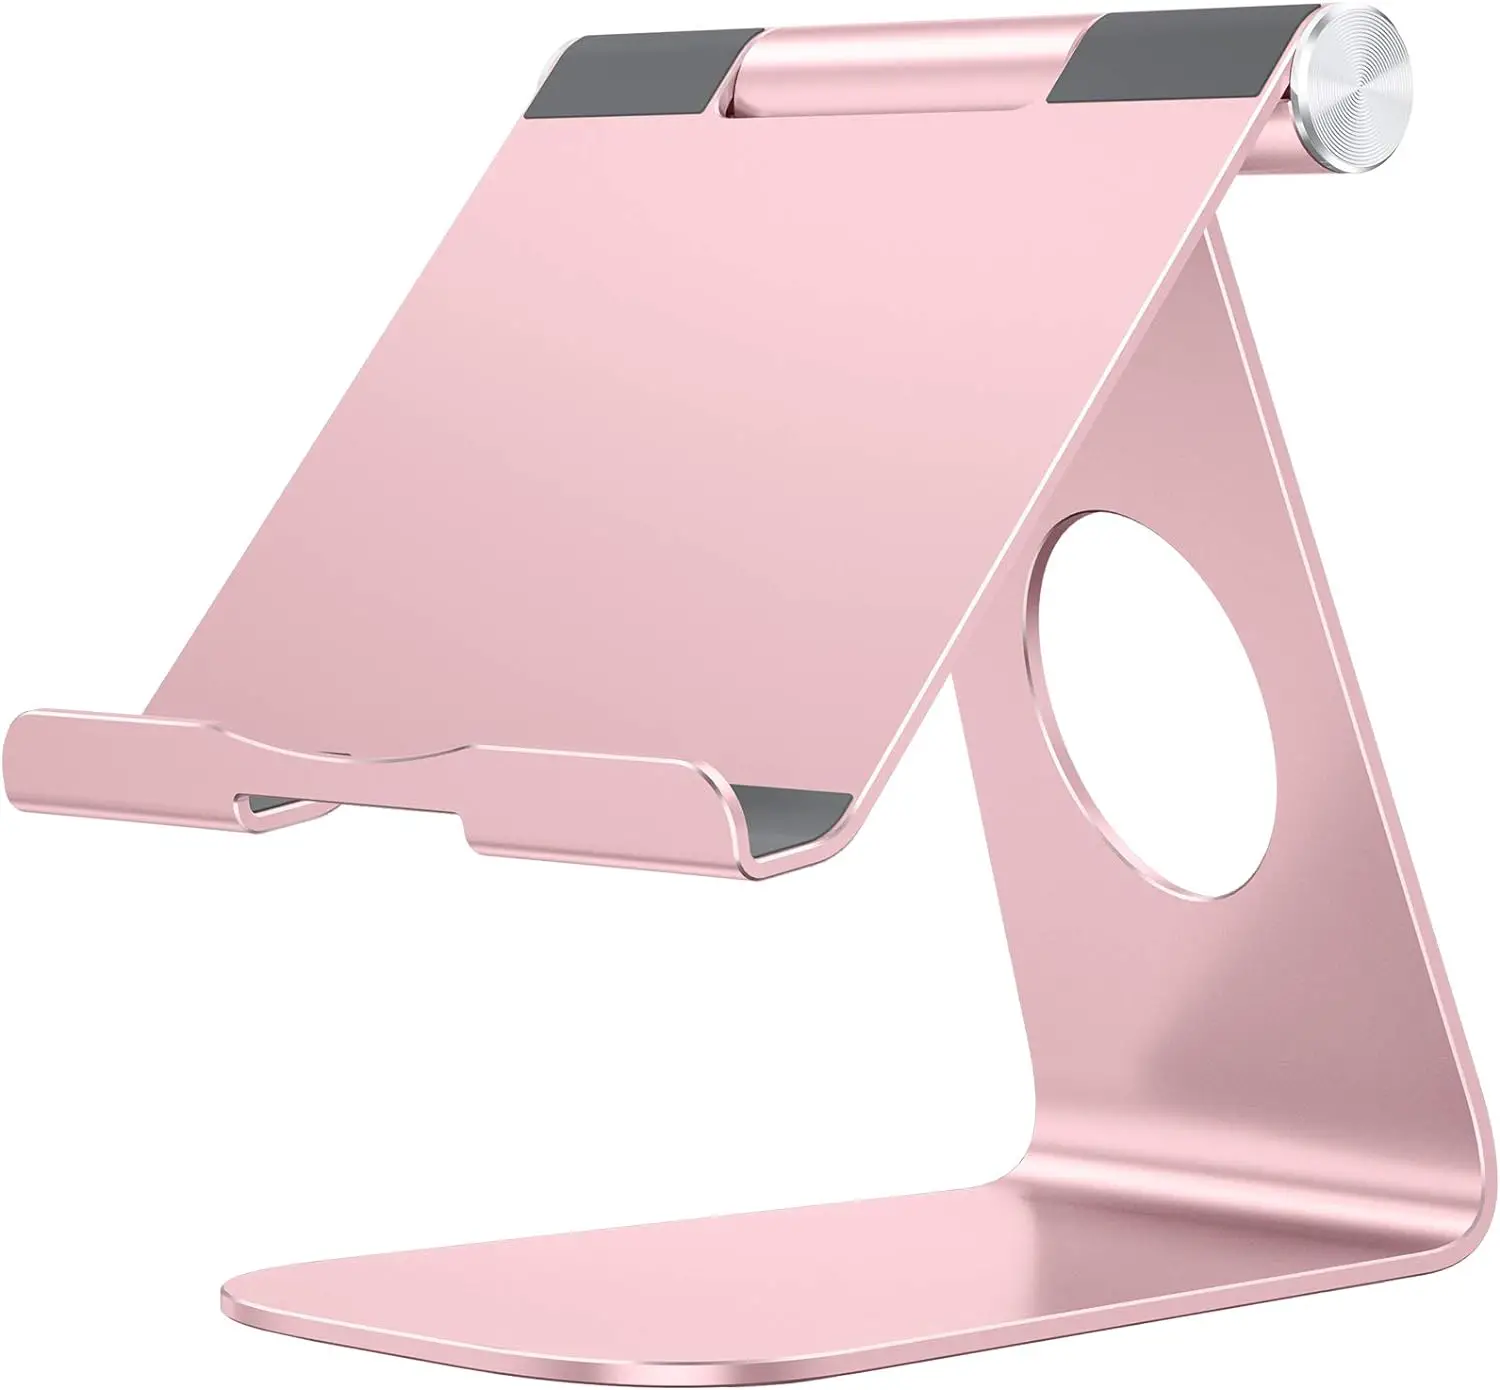 OMOTON Tablet Stand Holder Adjustable, T1 Desktop Aluminum Tablet Dock Cradle Compatible with iPad Air/Mini, iPad 10.2/9.7, iPad Pro 11/12.9, Samsung Tab and More, Rose Gold